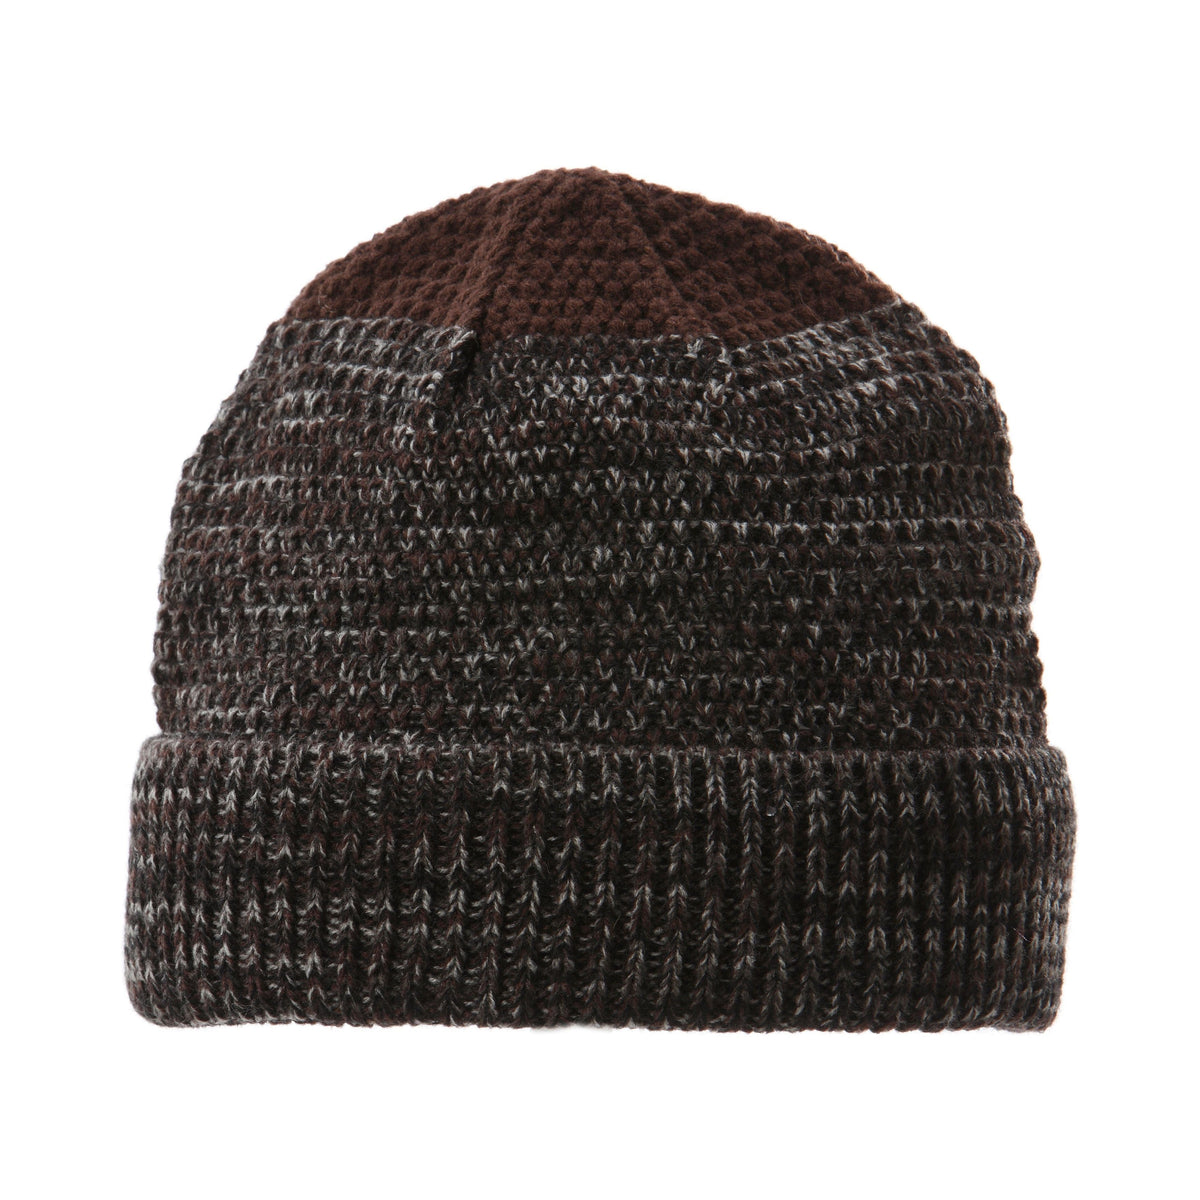 long-lasting Screamer – for super - beanie use comfy Gear Graham made A